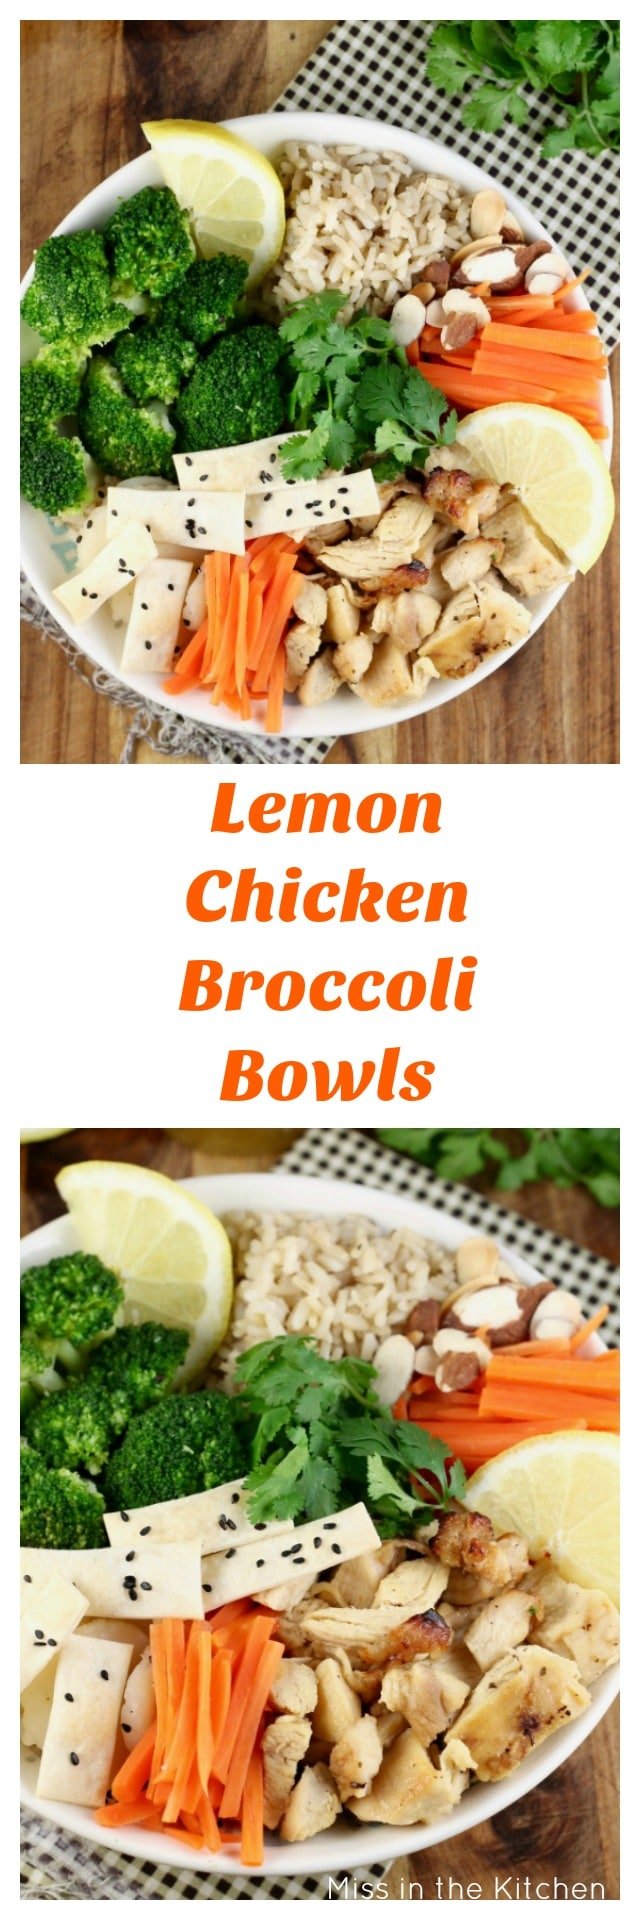 Quick Lemon Chicken Broccoli Bowls for an easy weeknight dinner that the whole family will enjoy! Sponsored by Tyson & Wish-Bone from MissintheKitchen.com